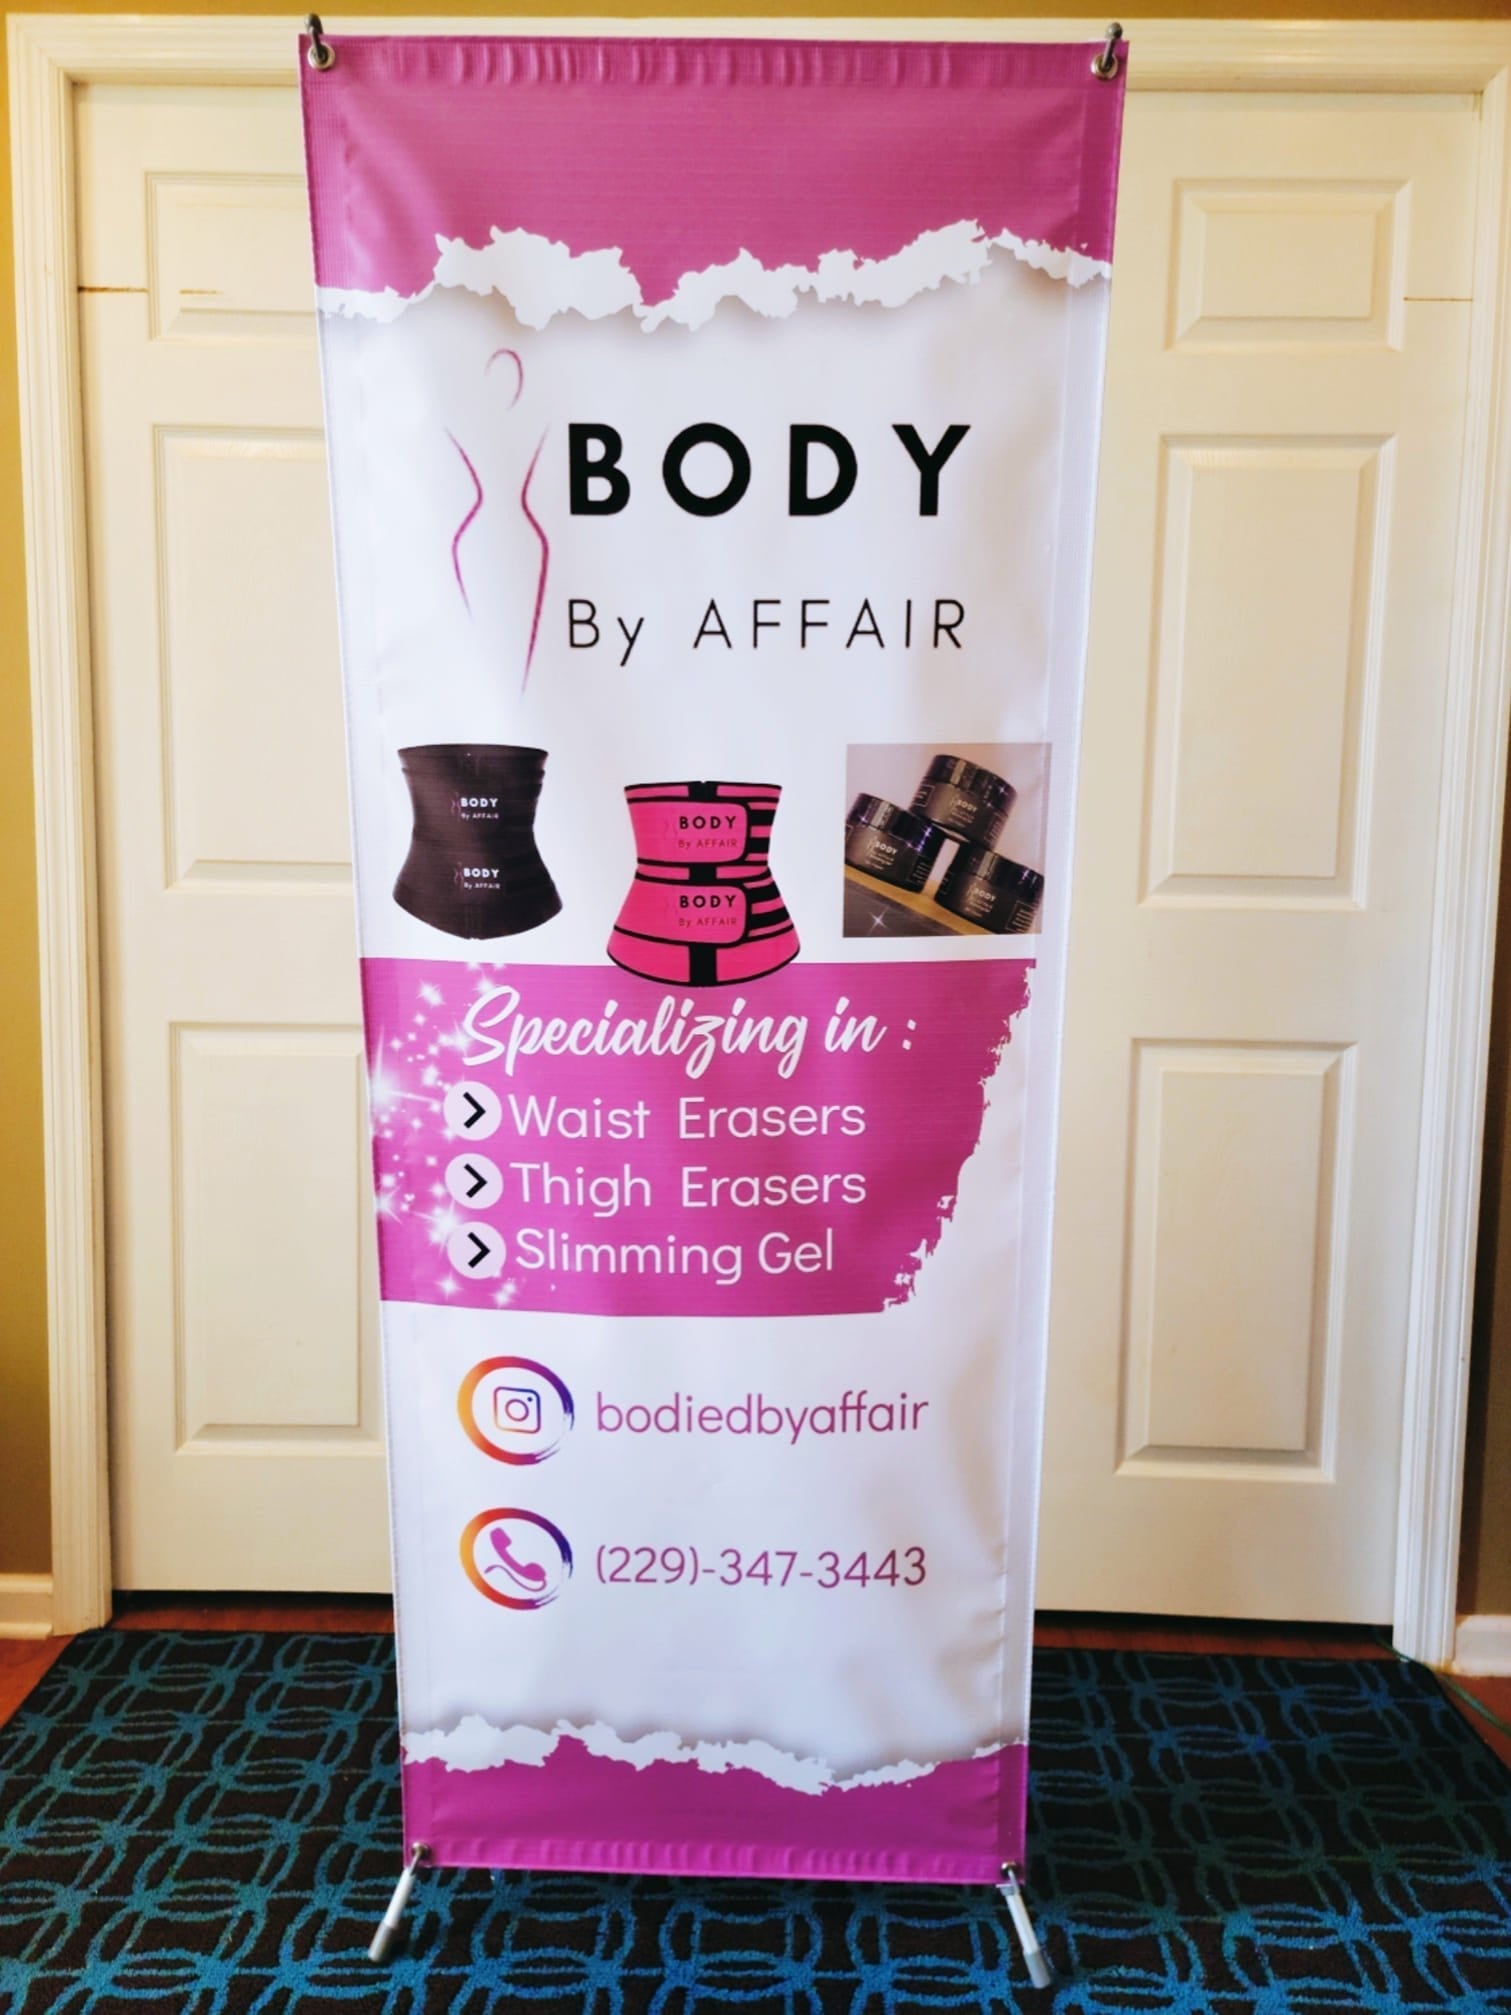 Banner Poster / X style Banner Stand